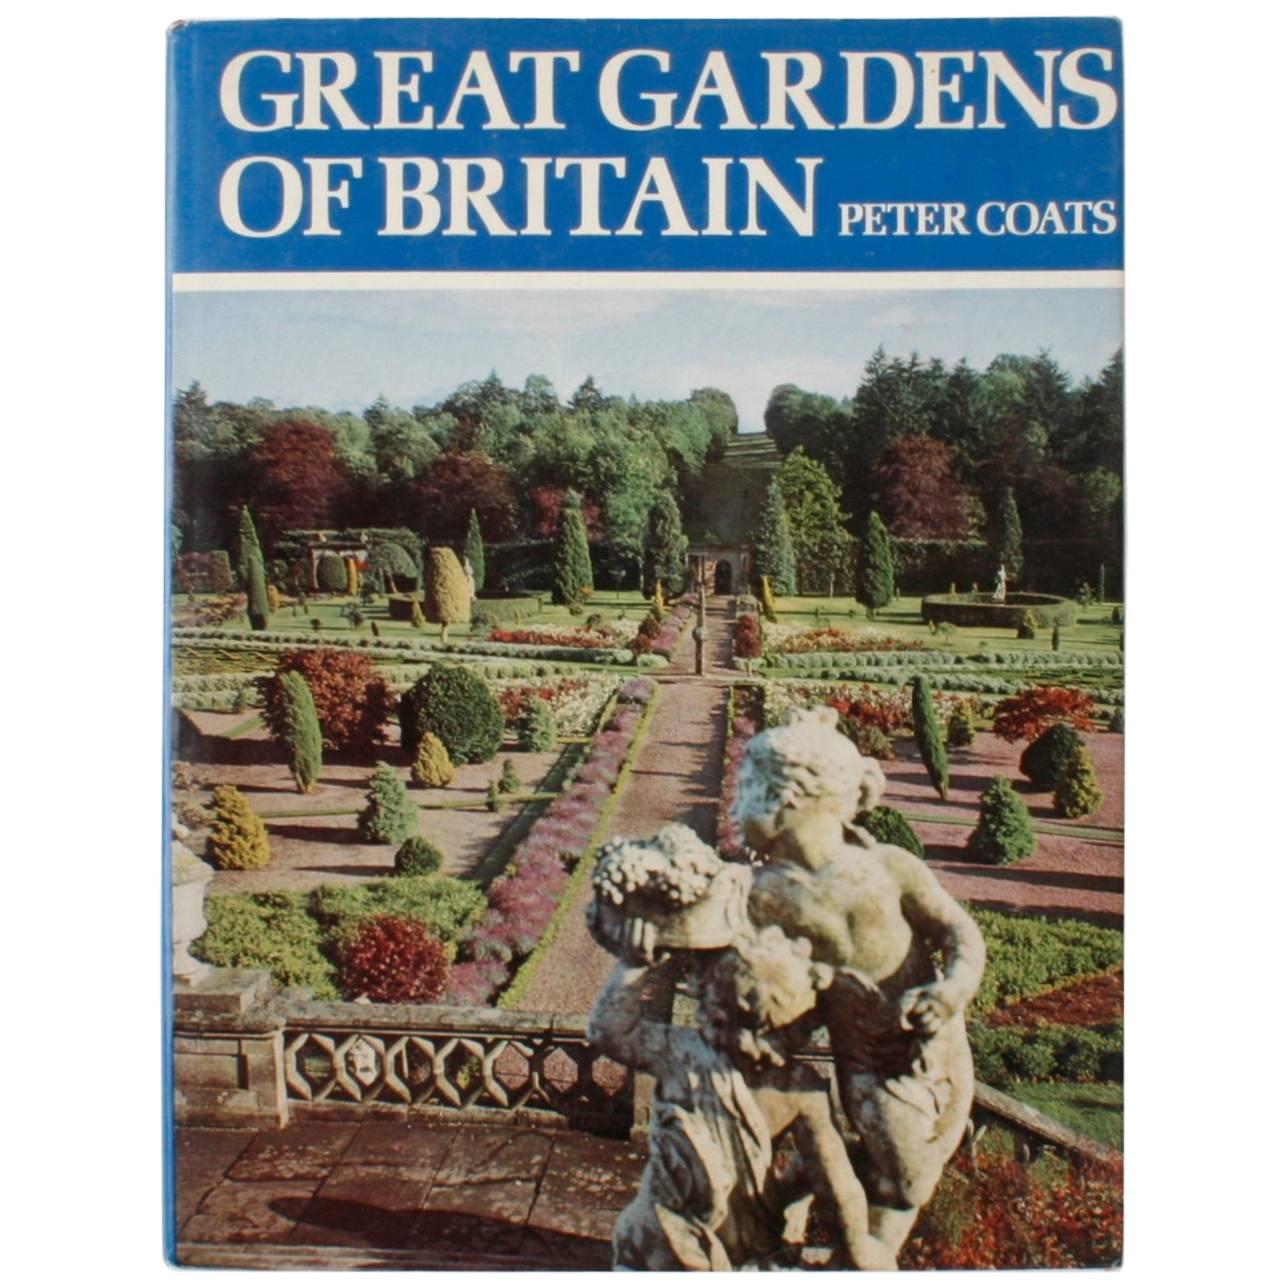 Great Gardens of Britain by Peter Coats